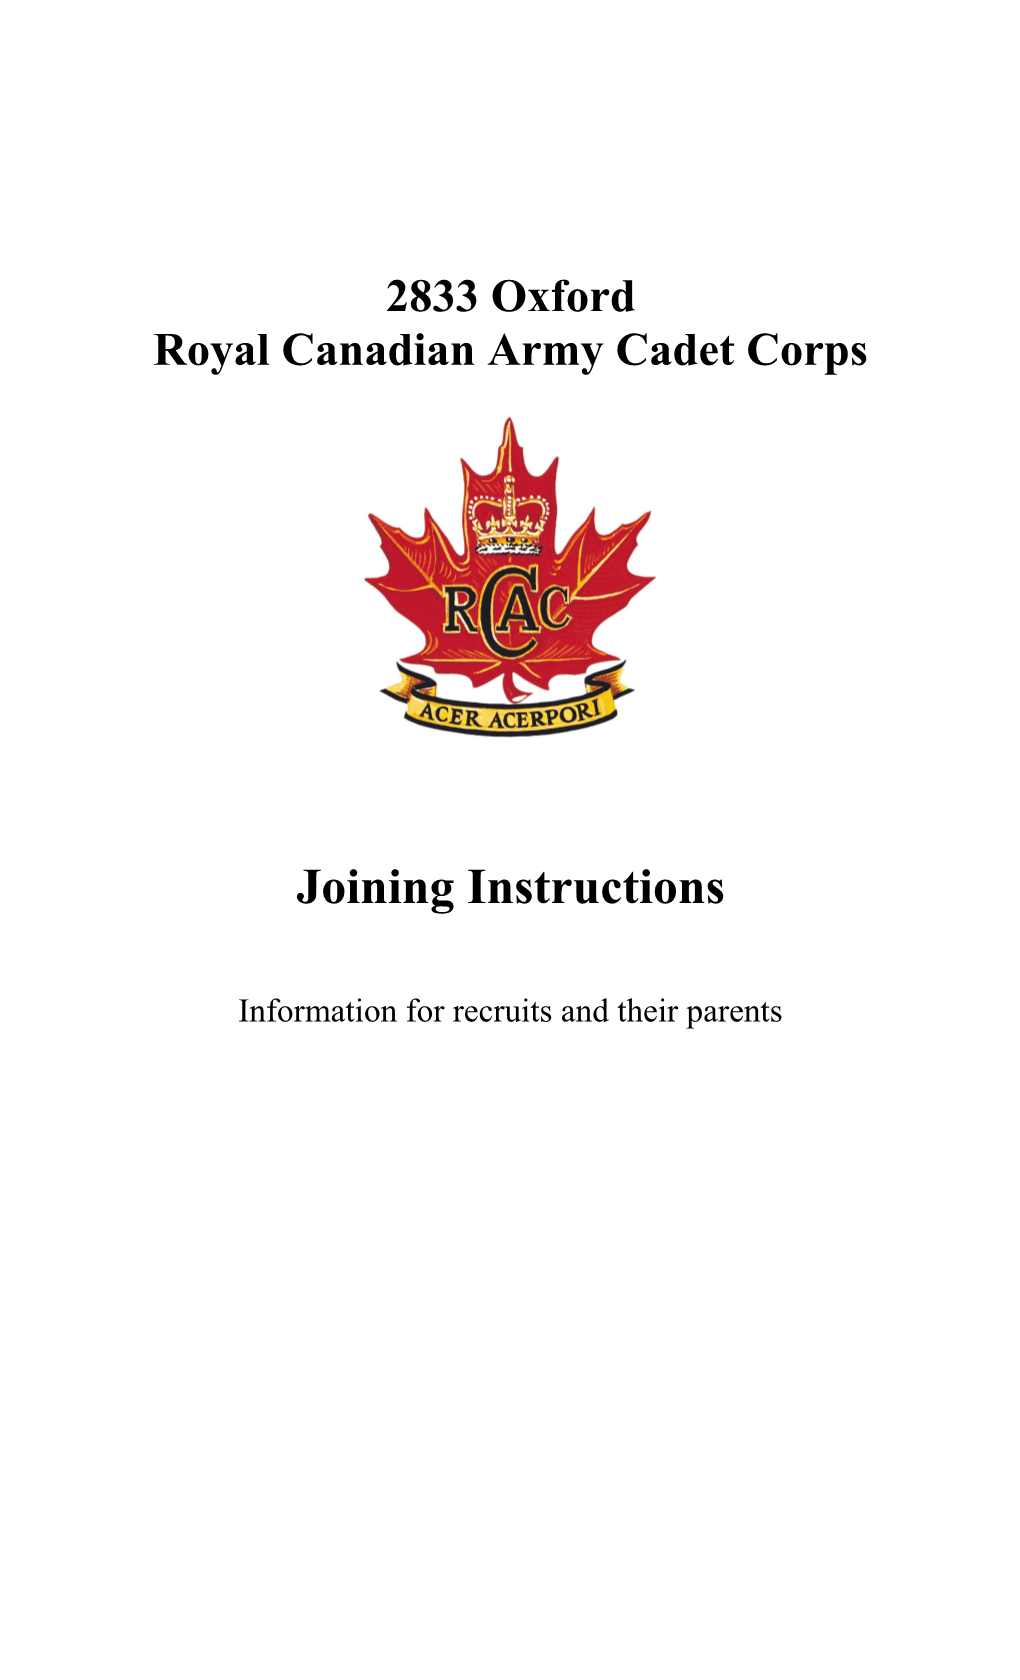 Royal Canadian Army Cadet Corps